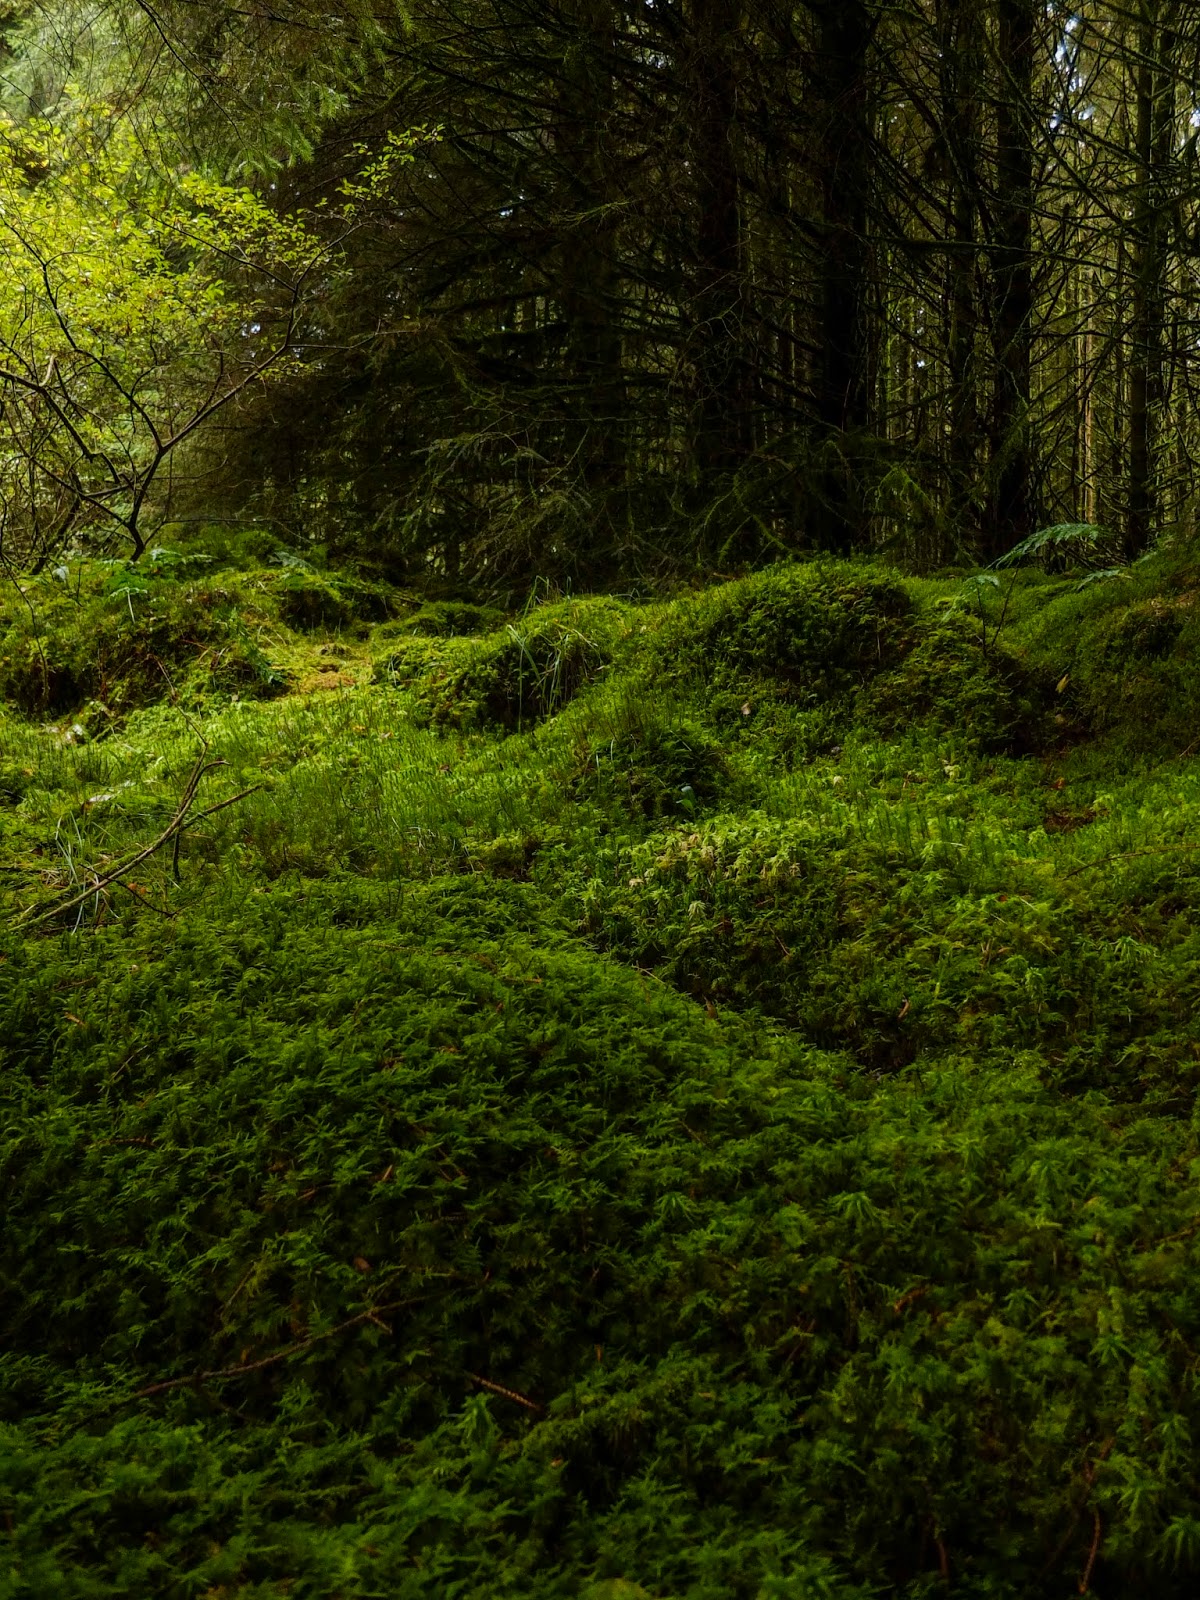 Moss covered mounds inside a forest.